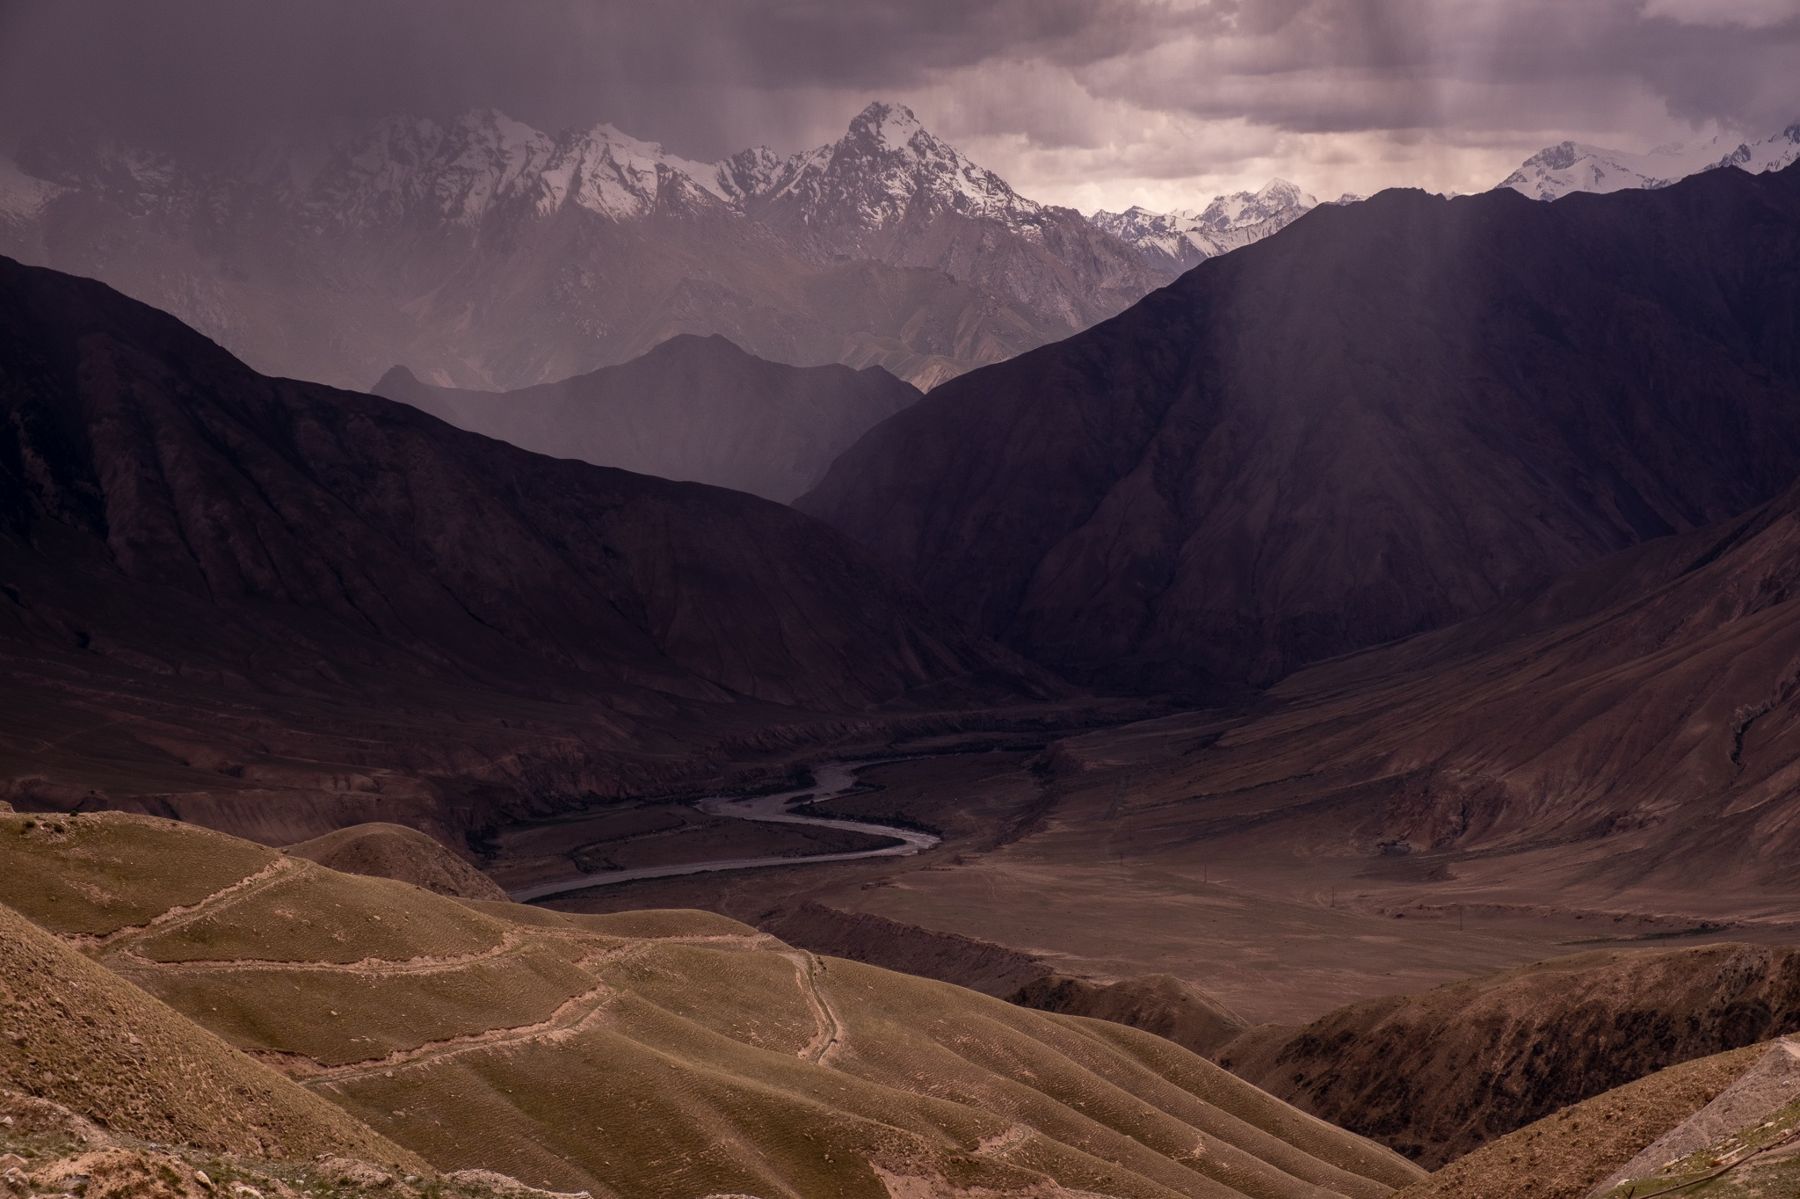 storm passing over mountains in enylcheck region kyrgyzstan